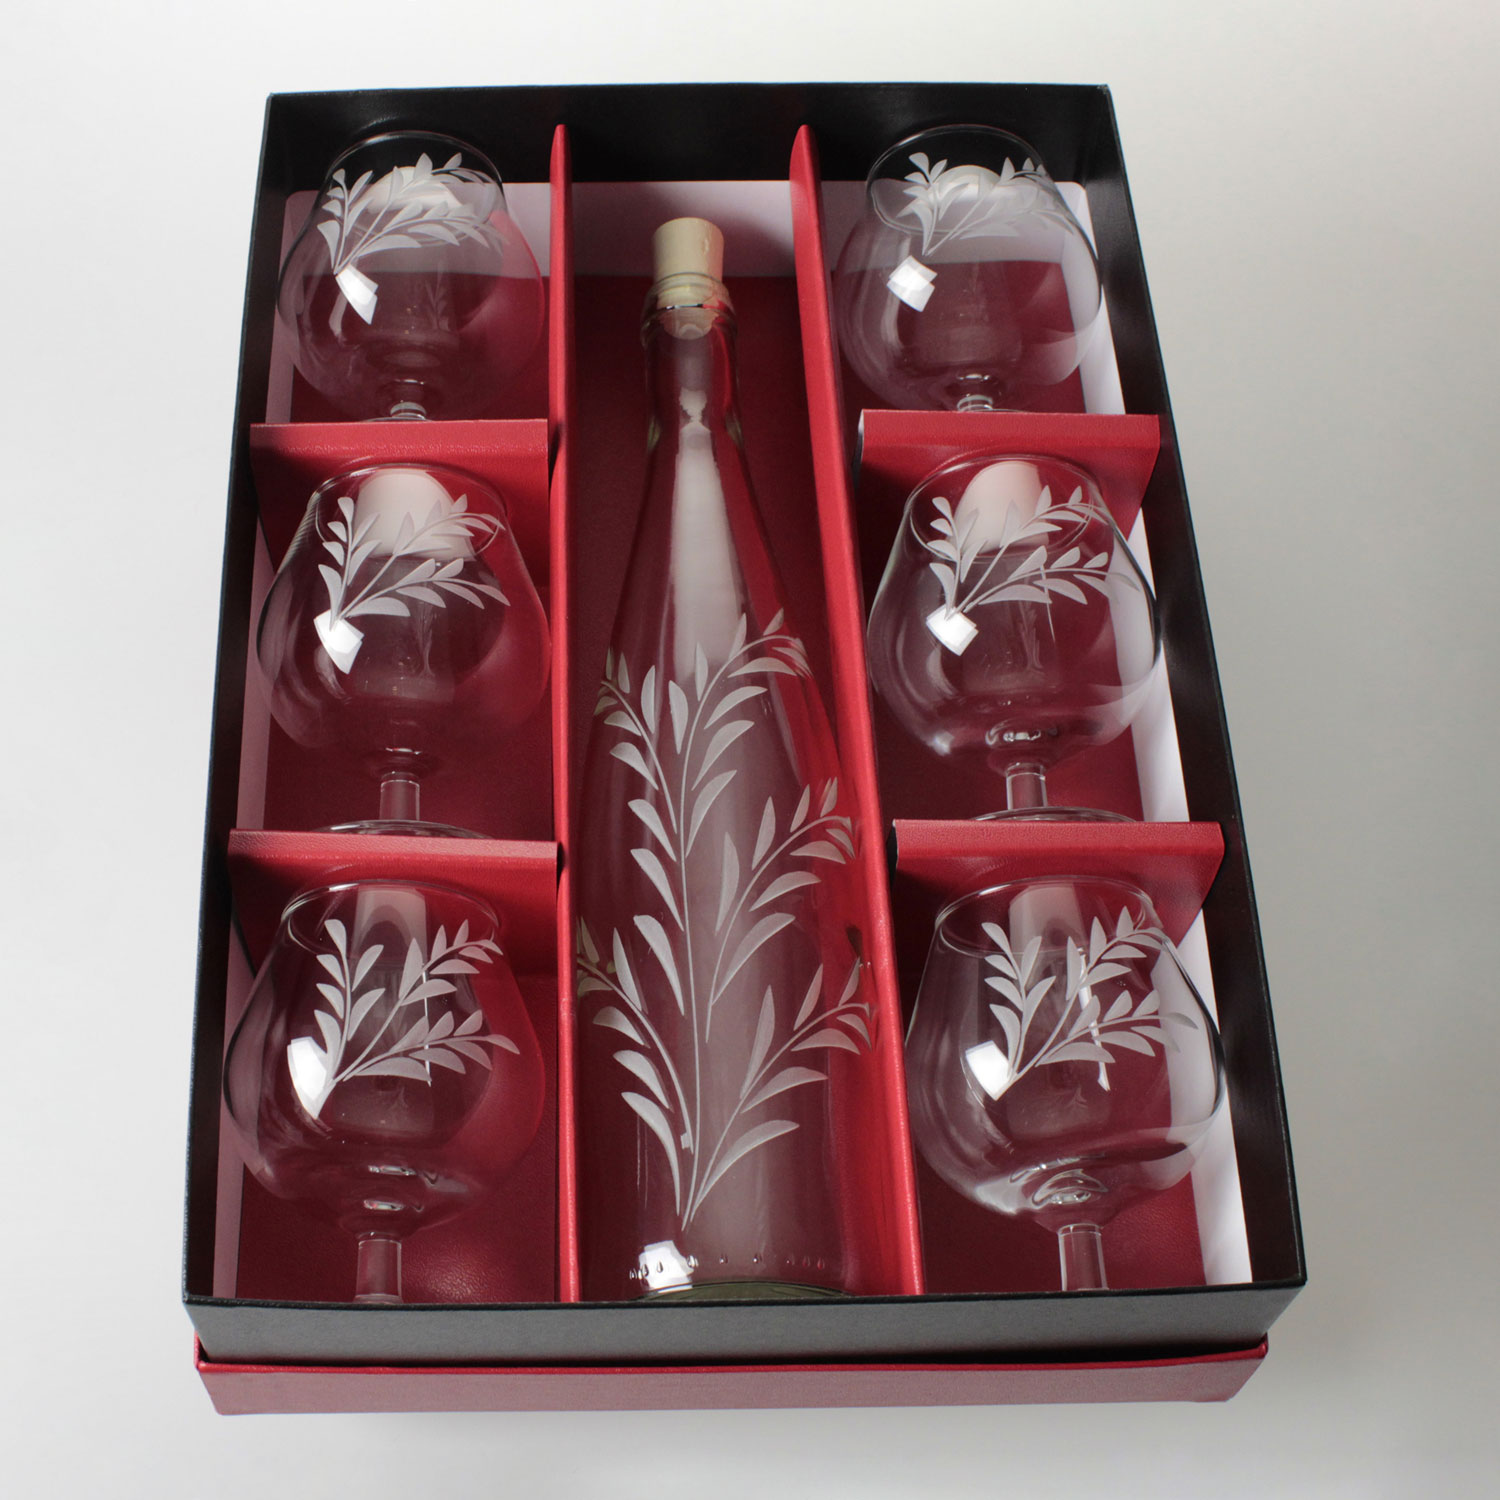 Coffret_6_dégustations_bouteille_taille_bruno